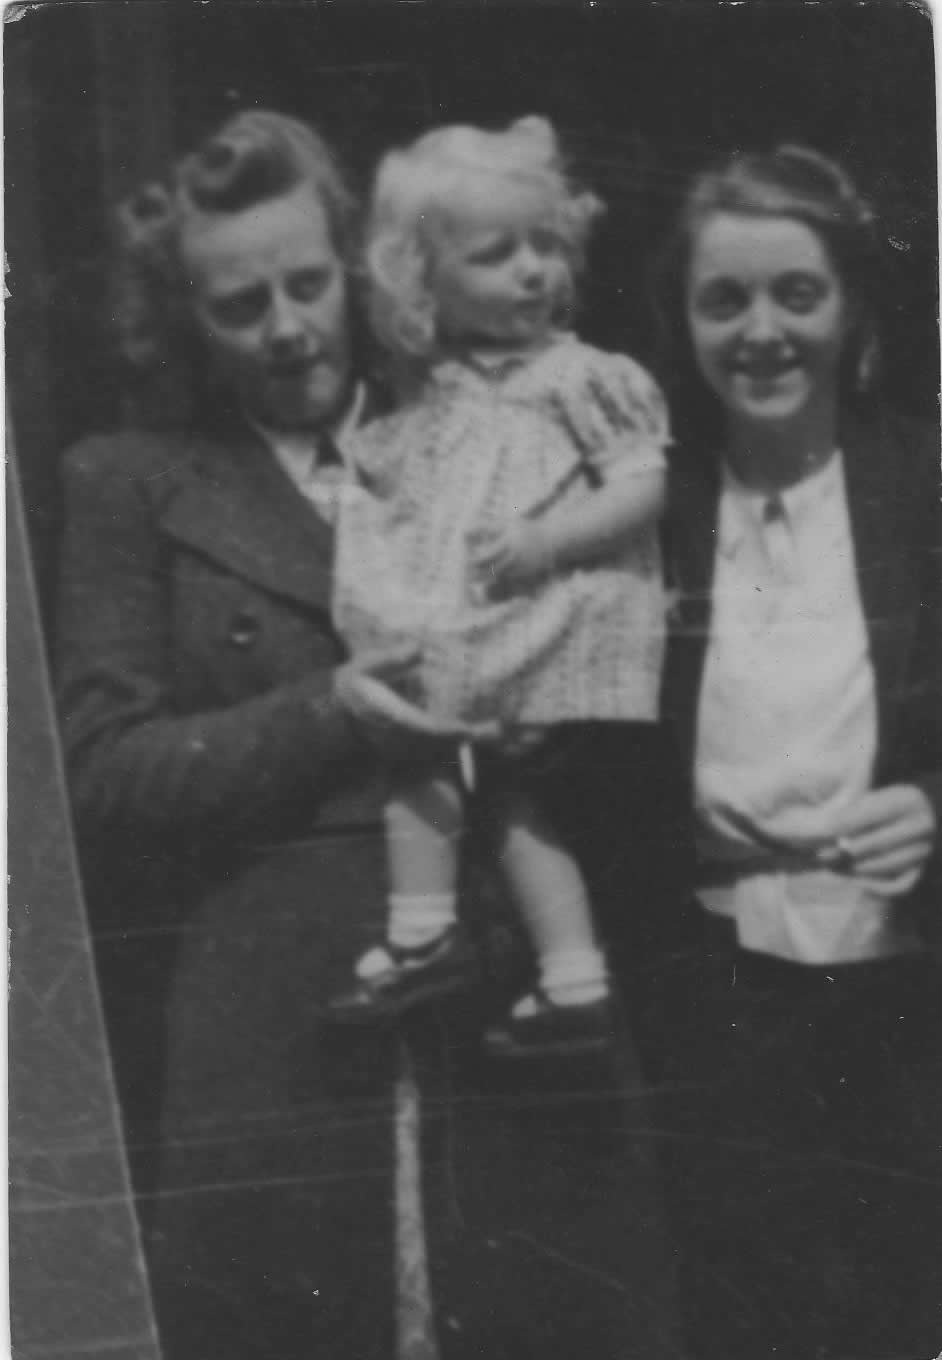 Kitty with Yvonne and her mother